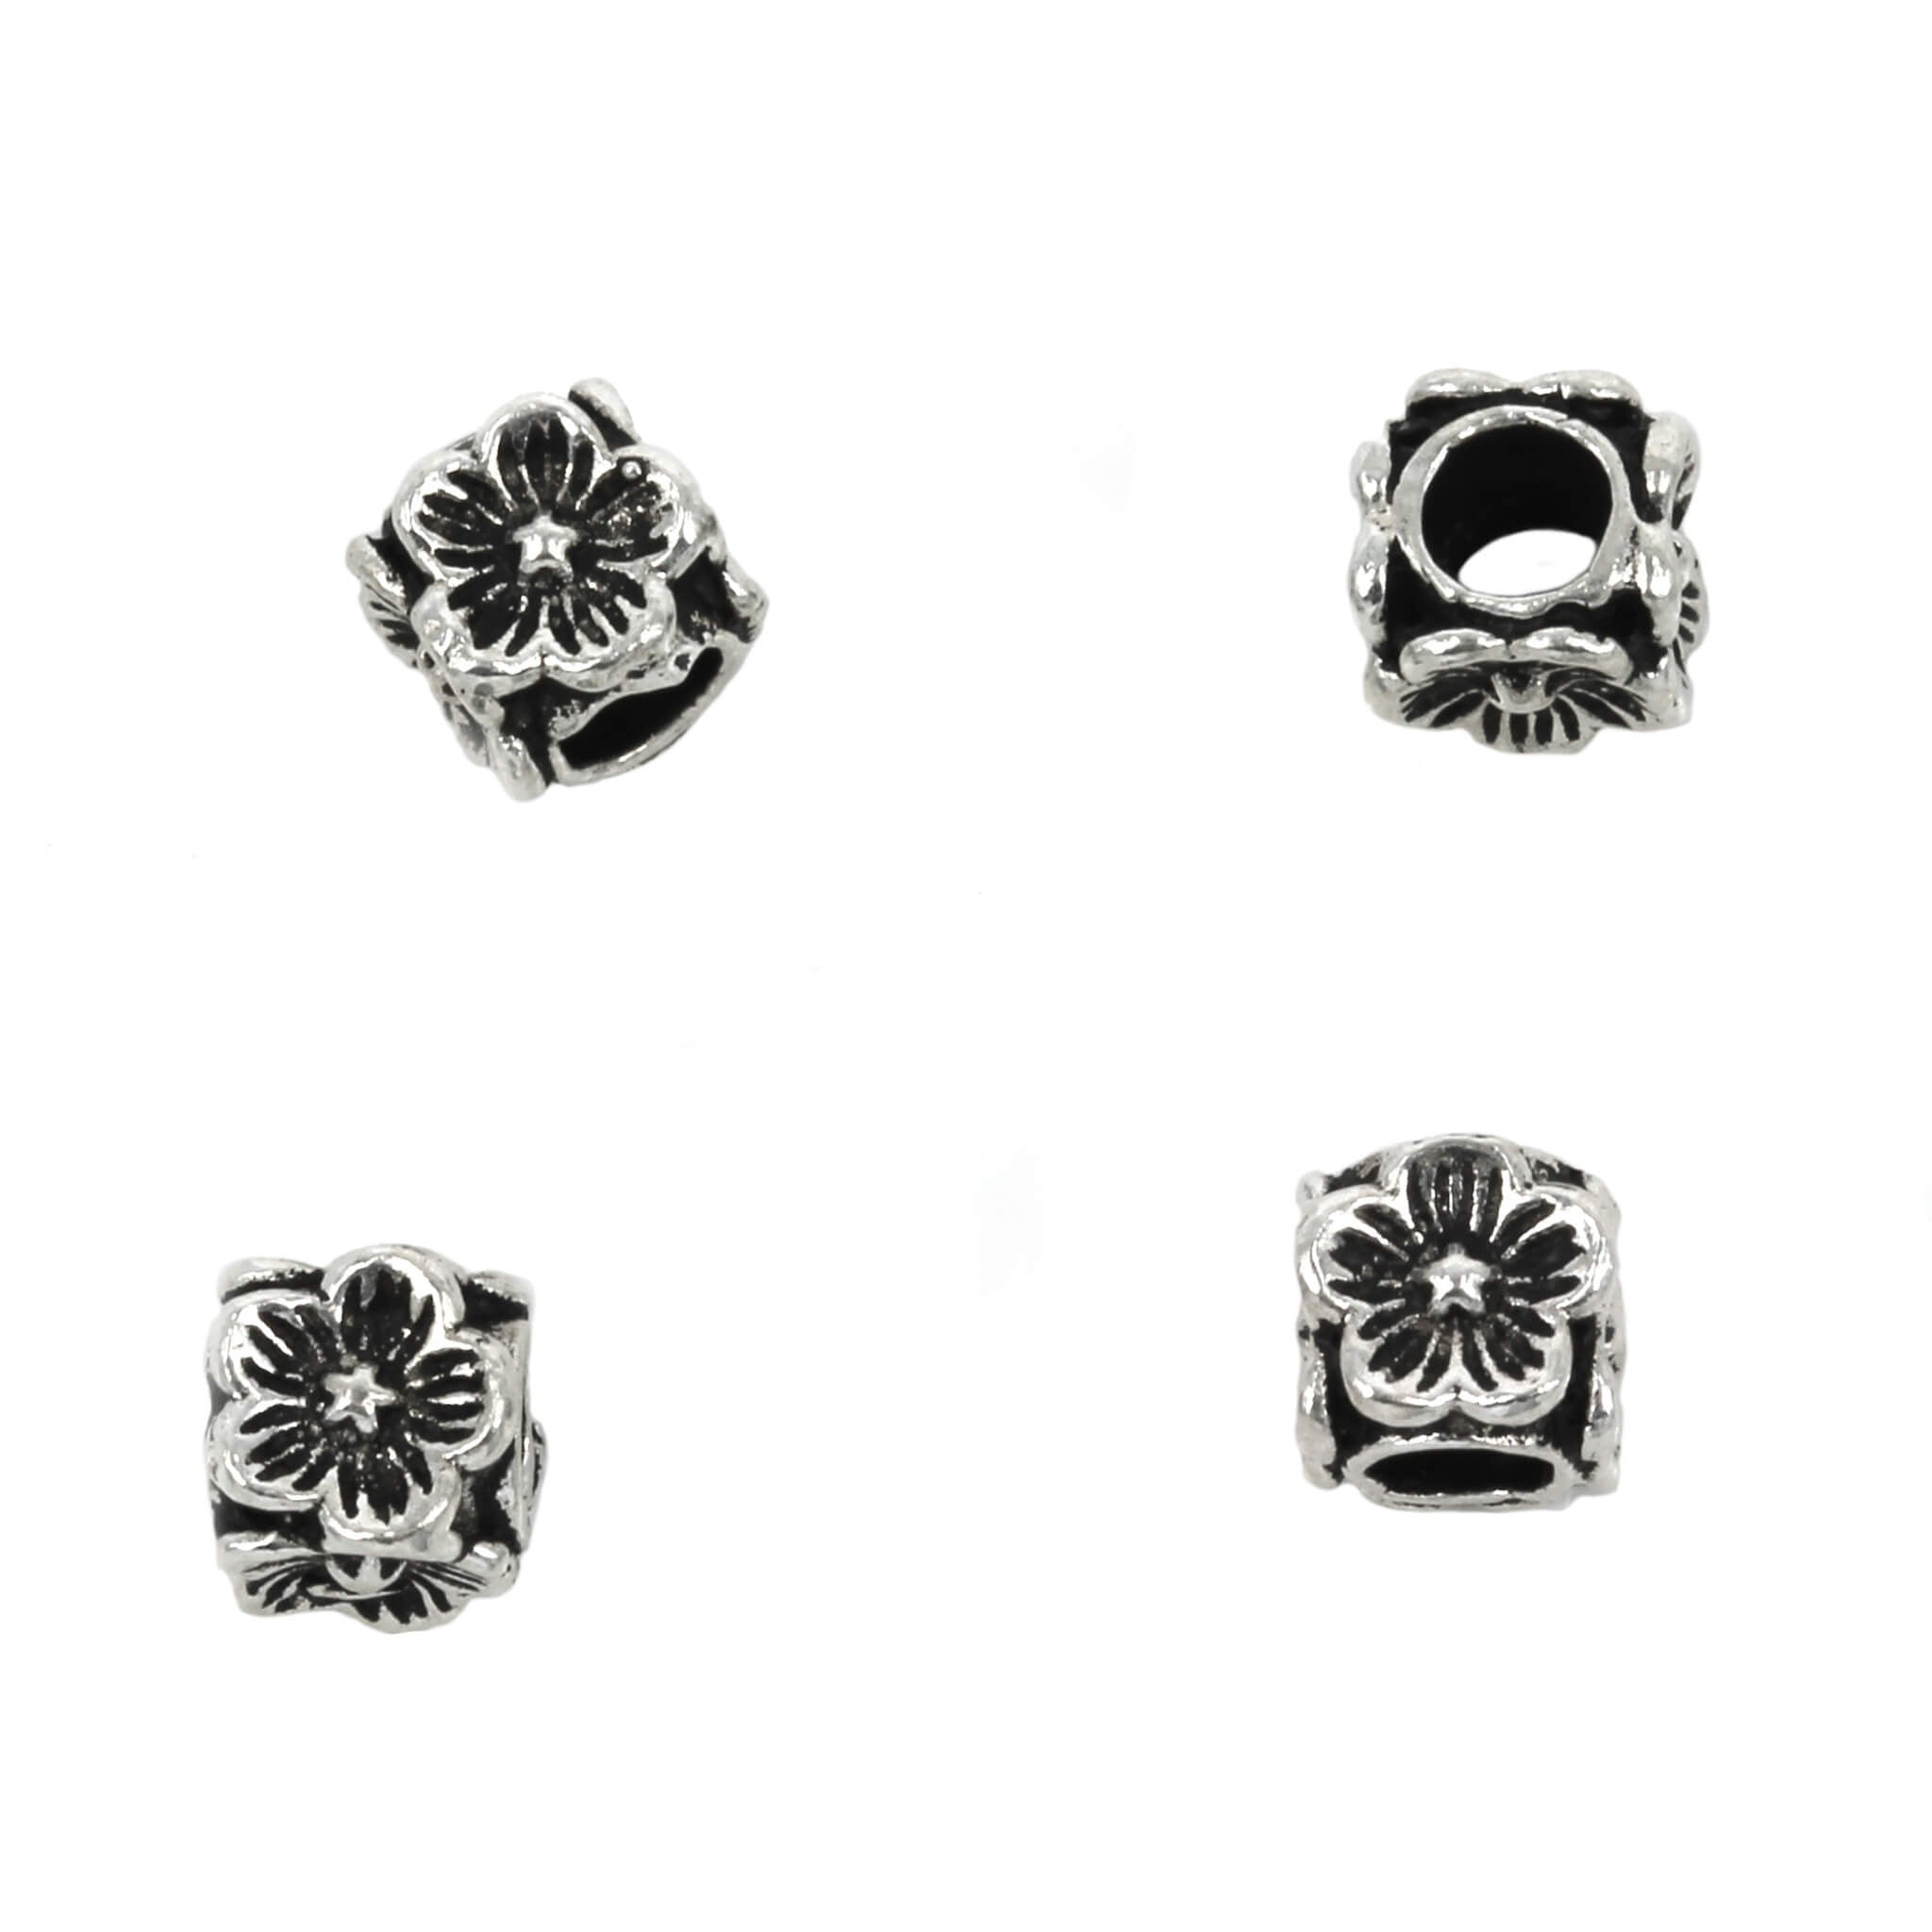 Floral Decorated Cube Spacer Bead in Sterling Silver 6x6mm